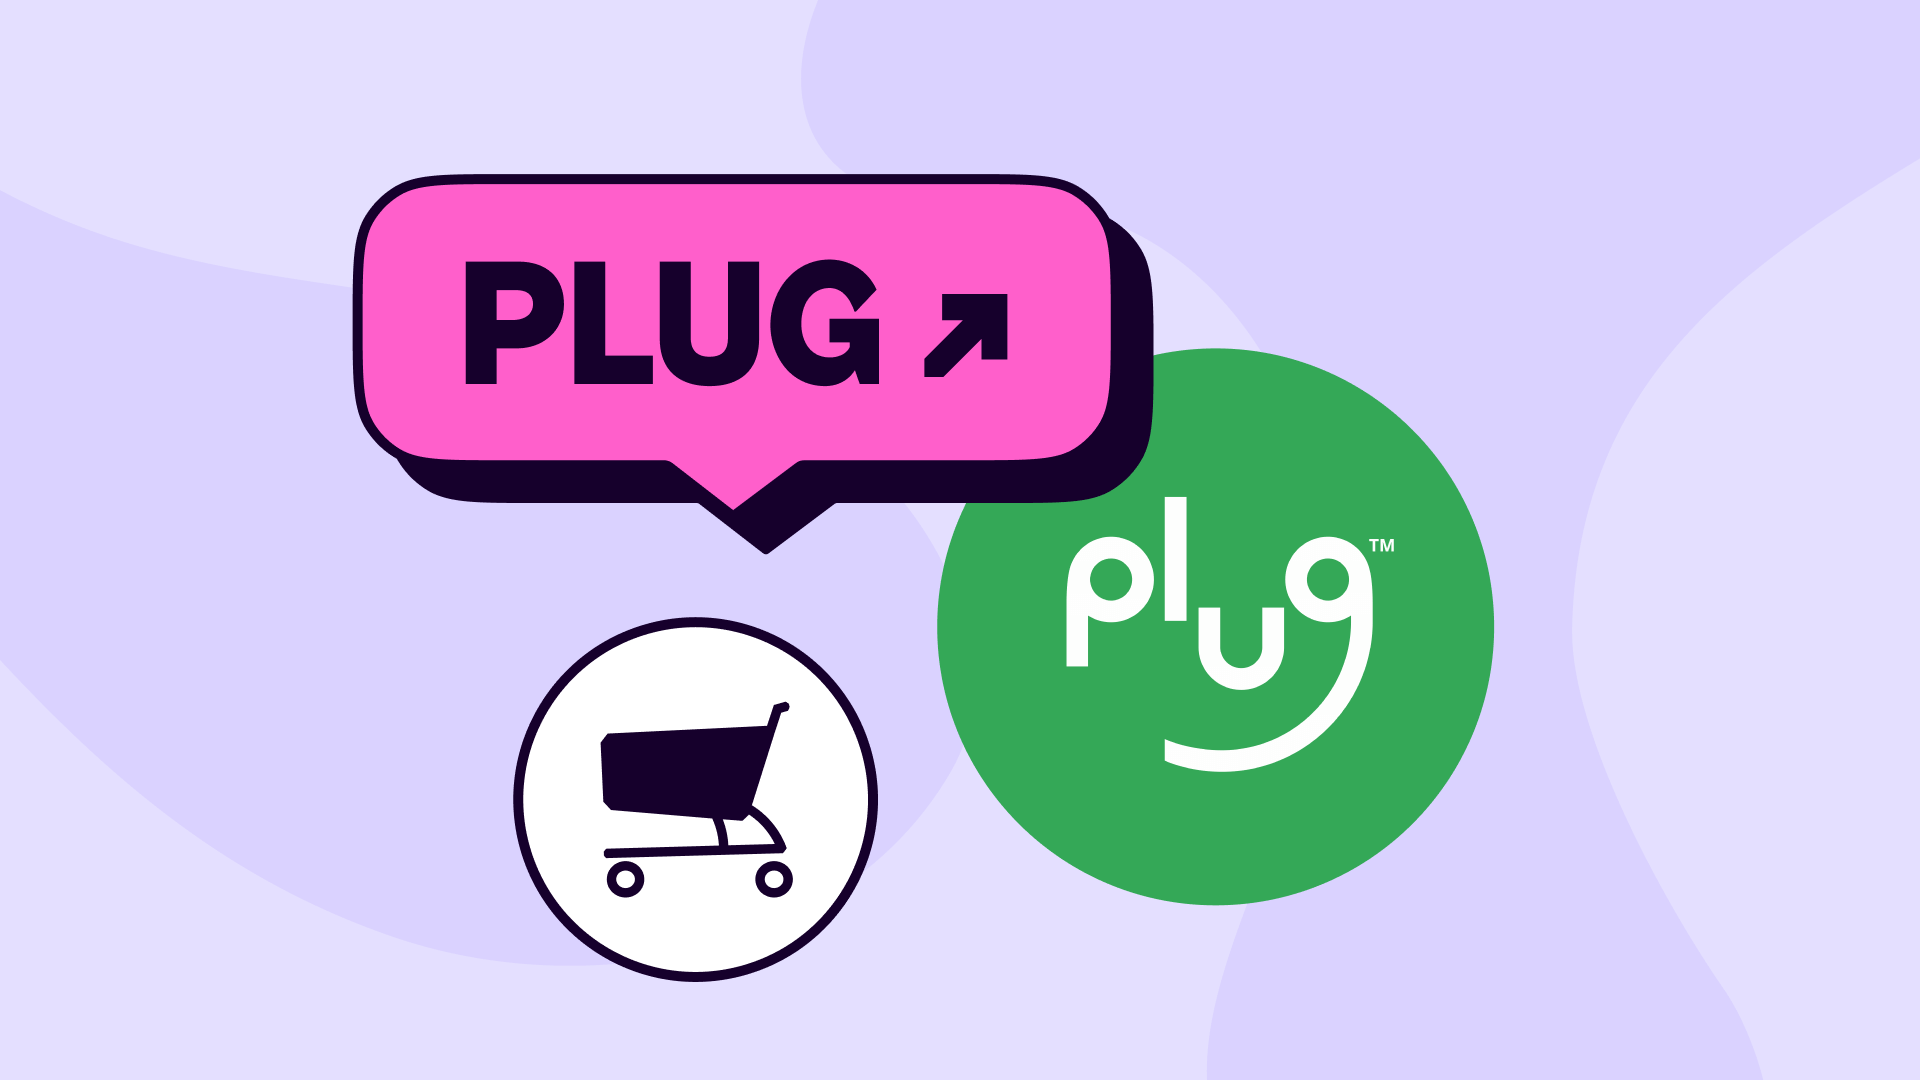 How to buy and sell Plug Power shares